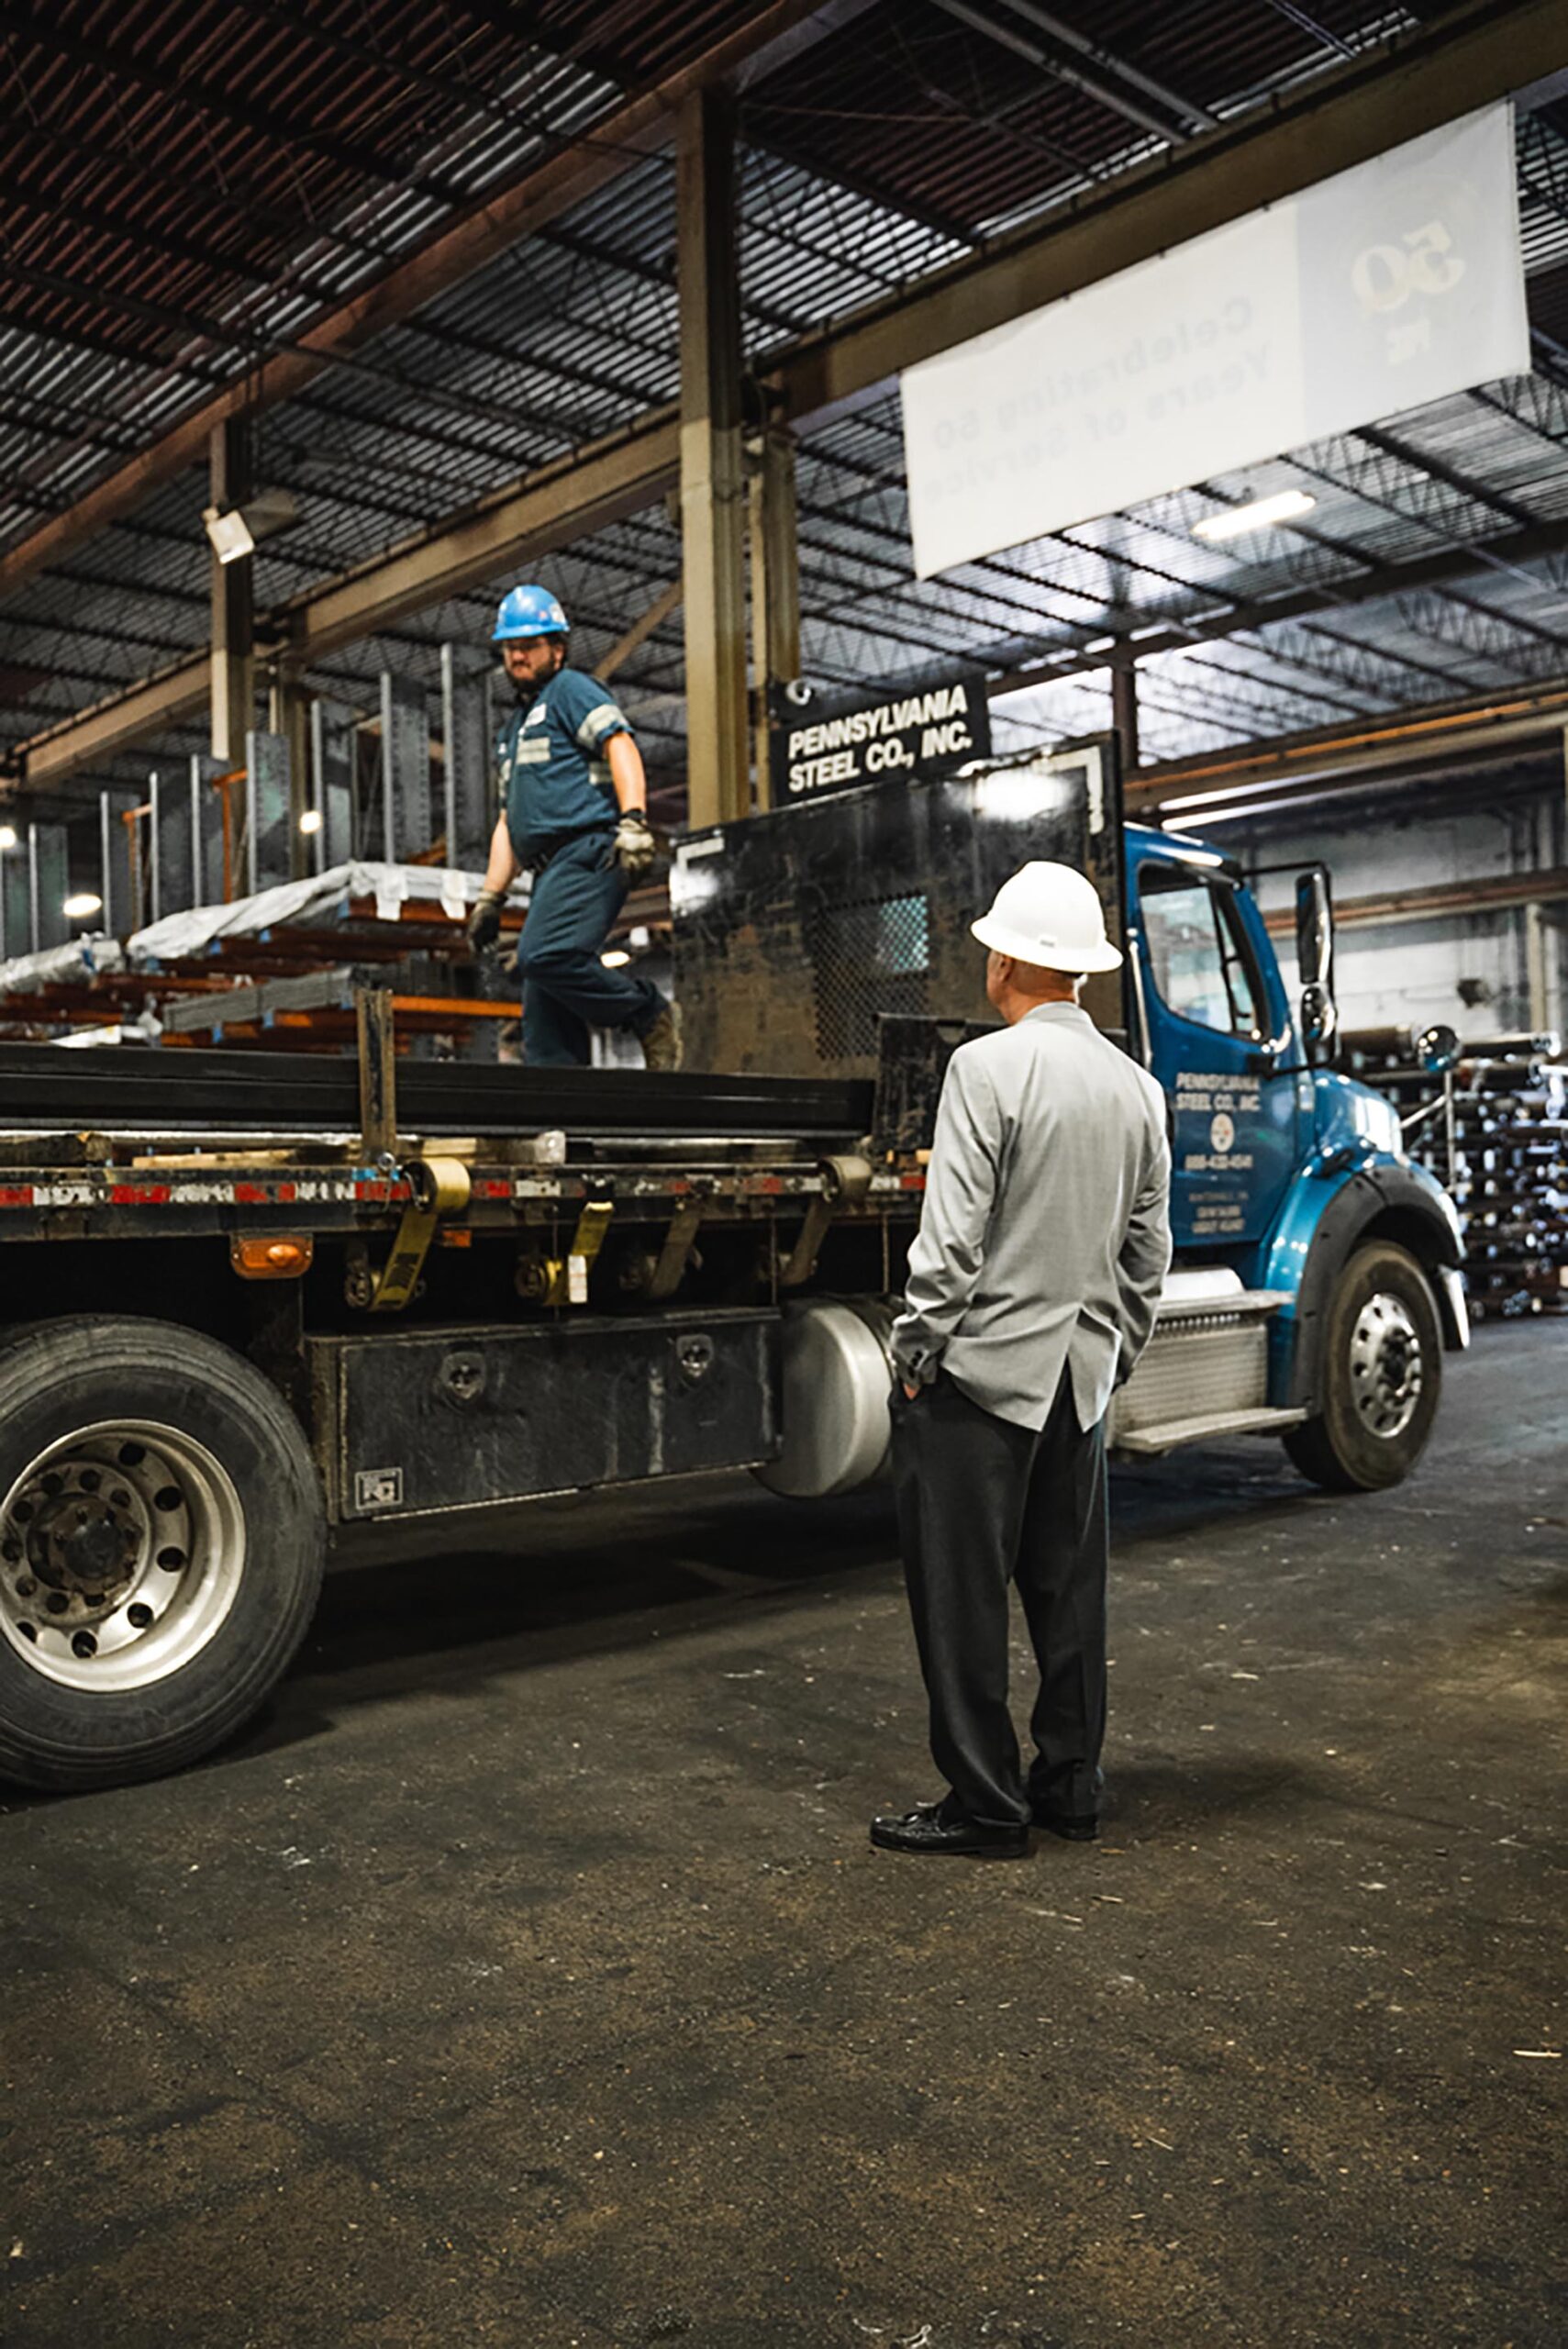 Two PA Steel employees talking while loading metal onto a delivery truck